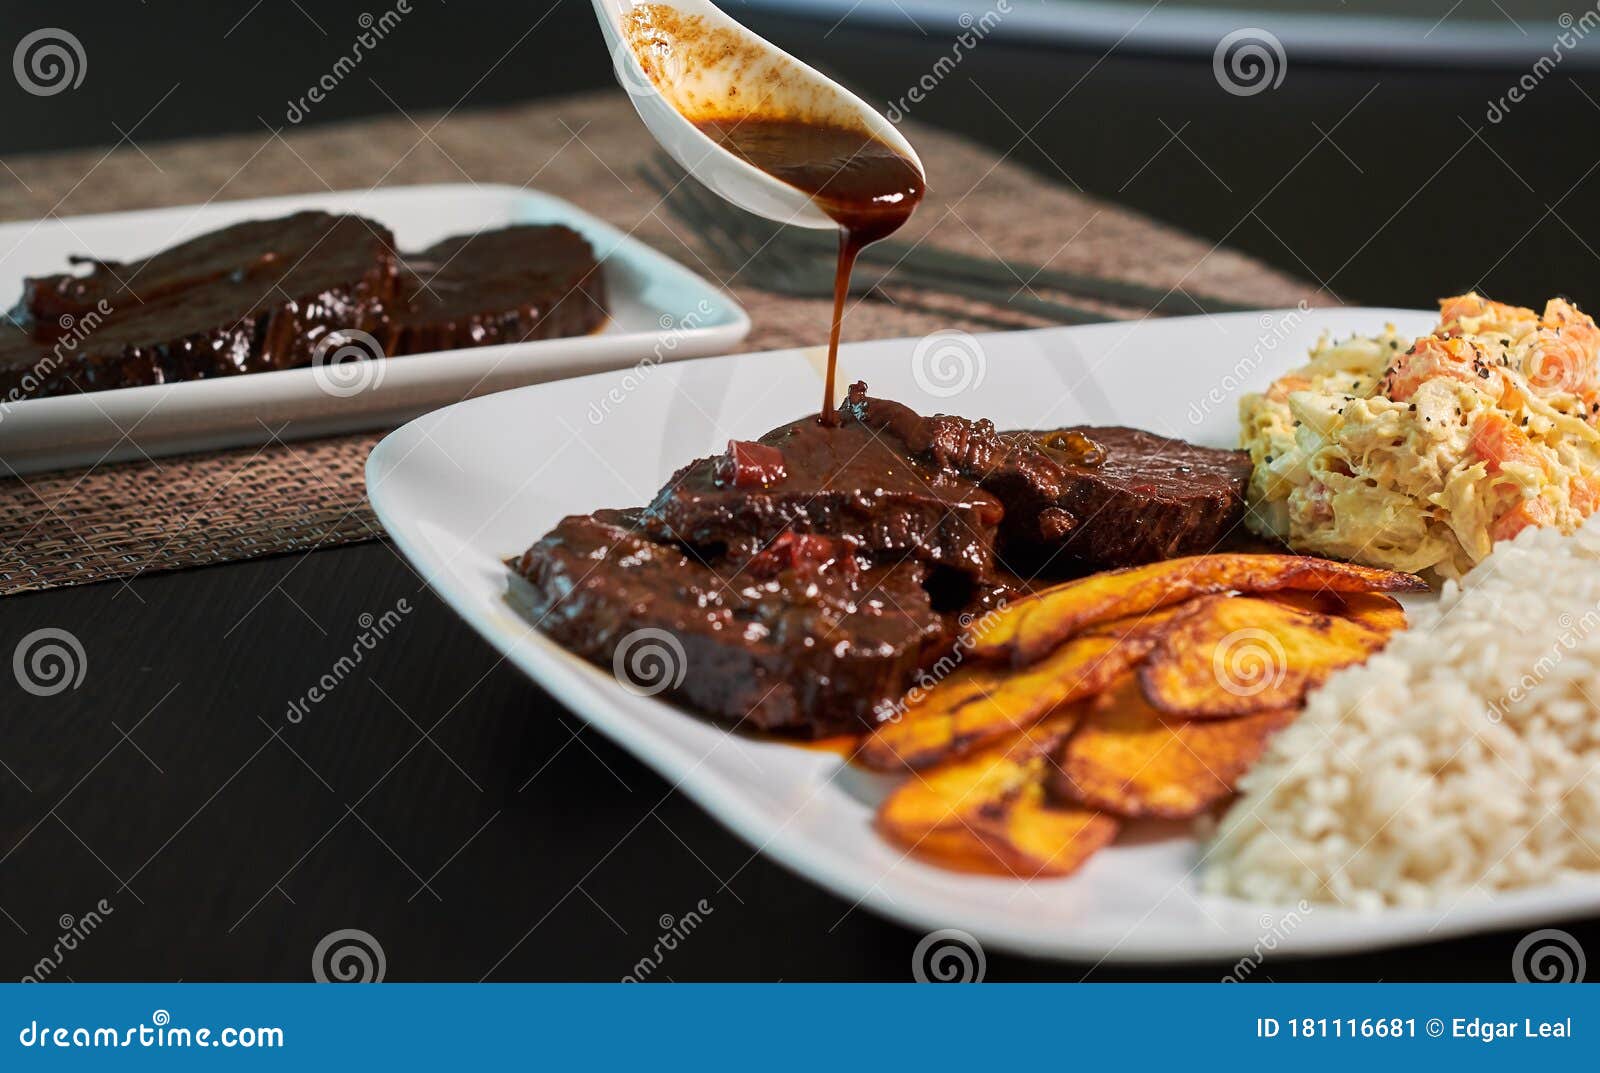 typical dish of black roasted venezuela with chicken salad and banana